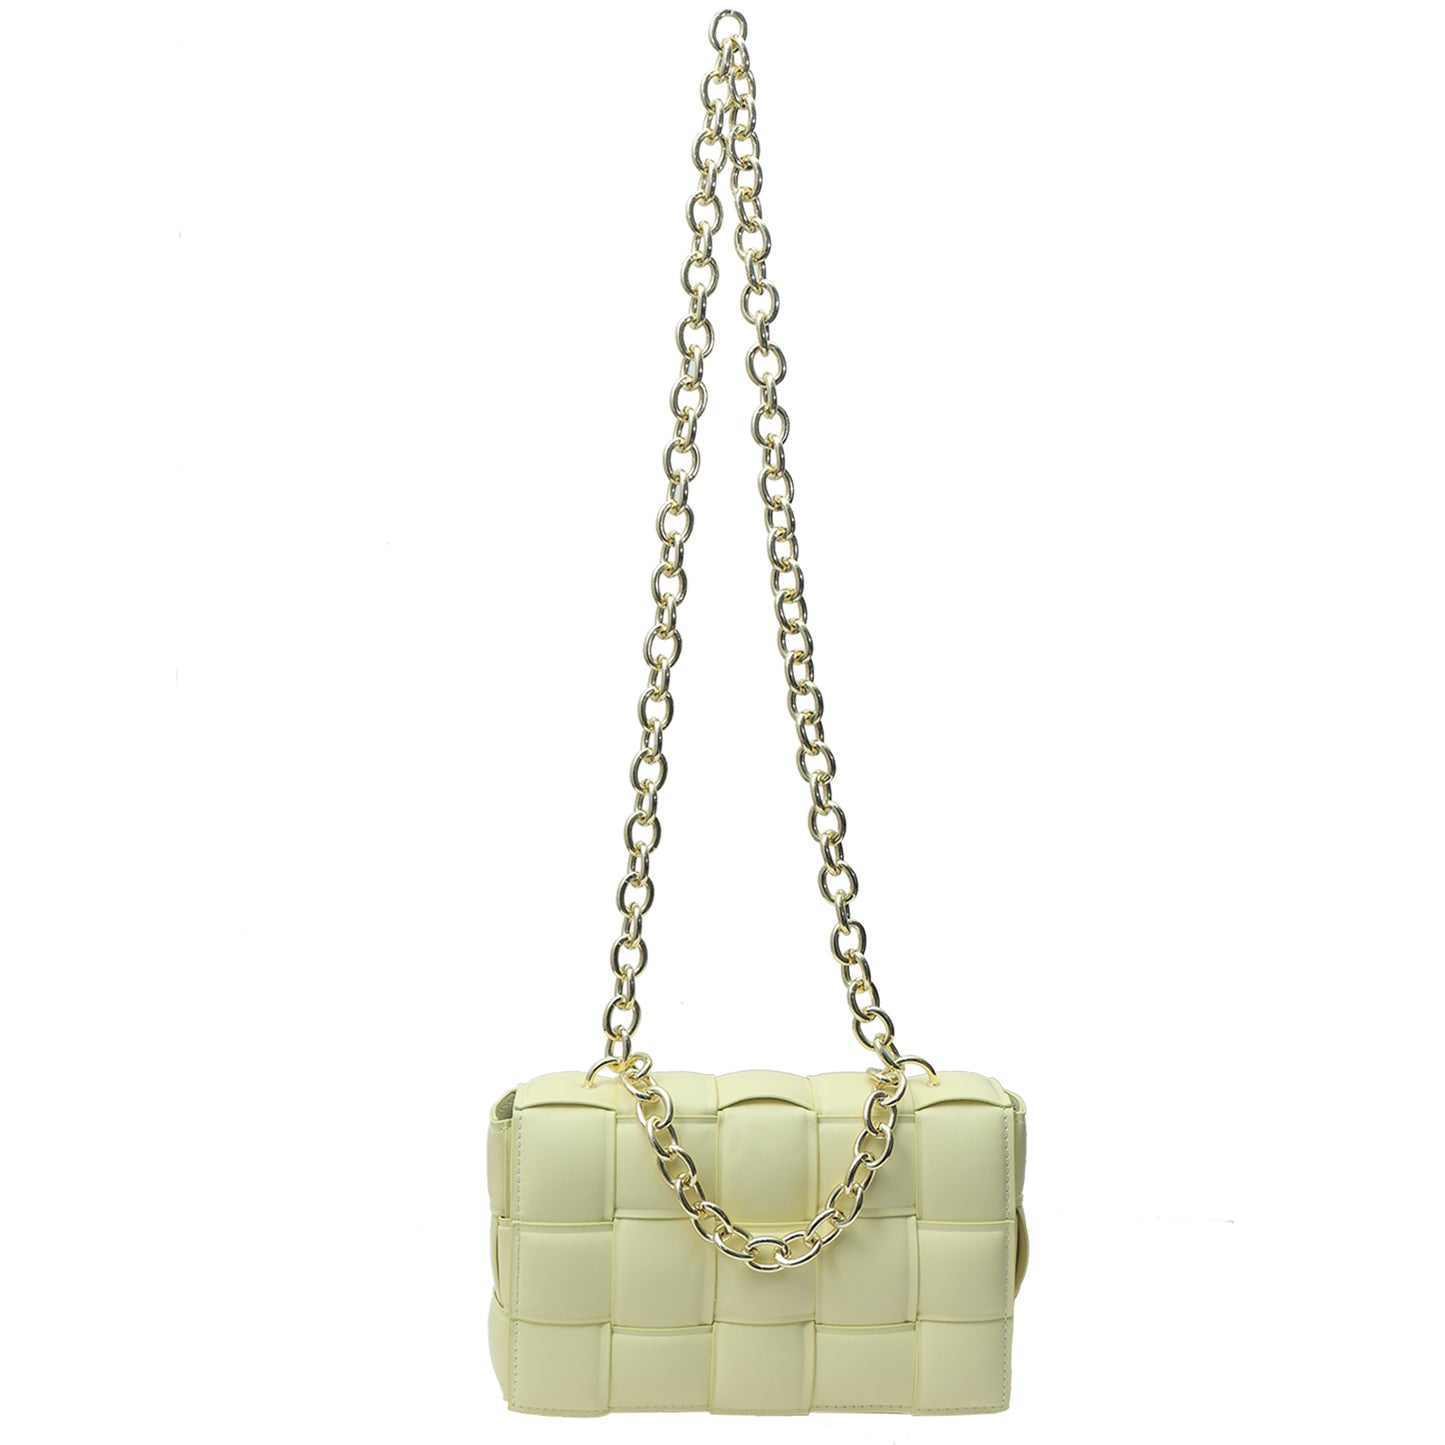 Yellow Sling Bag with Elegant Chain for Girls